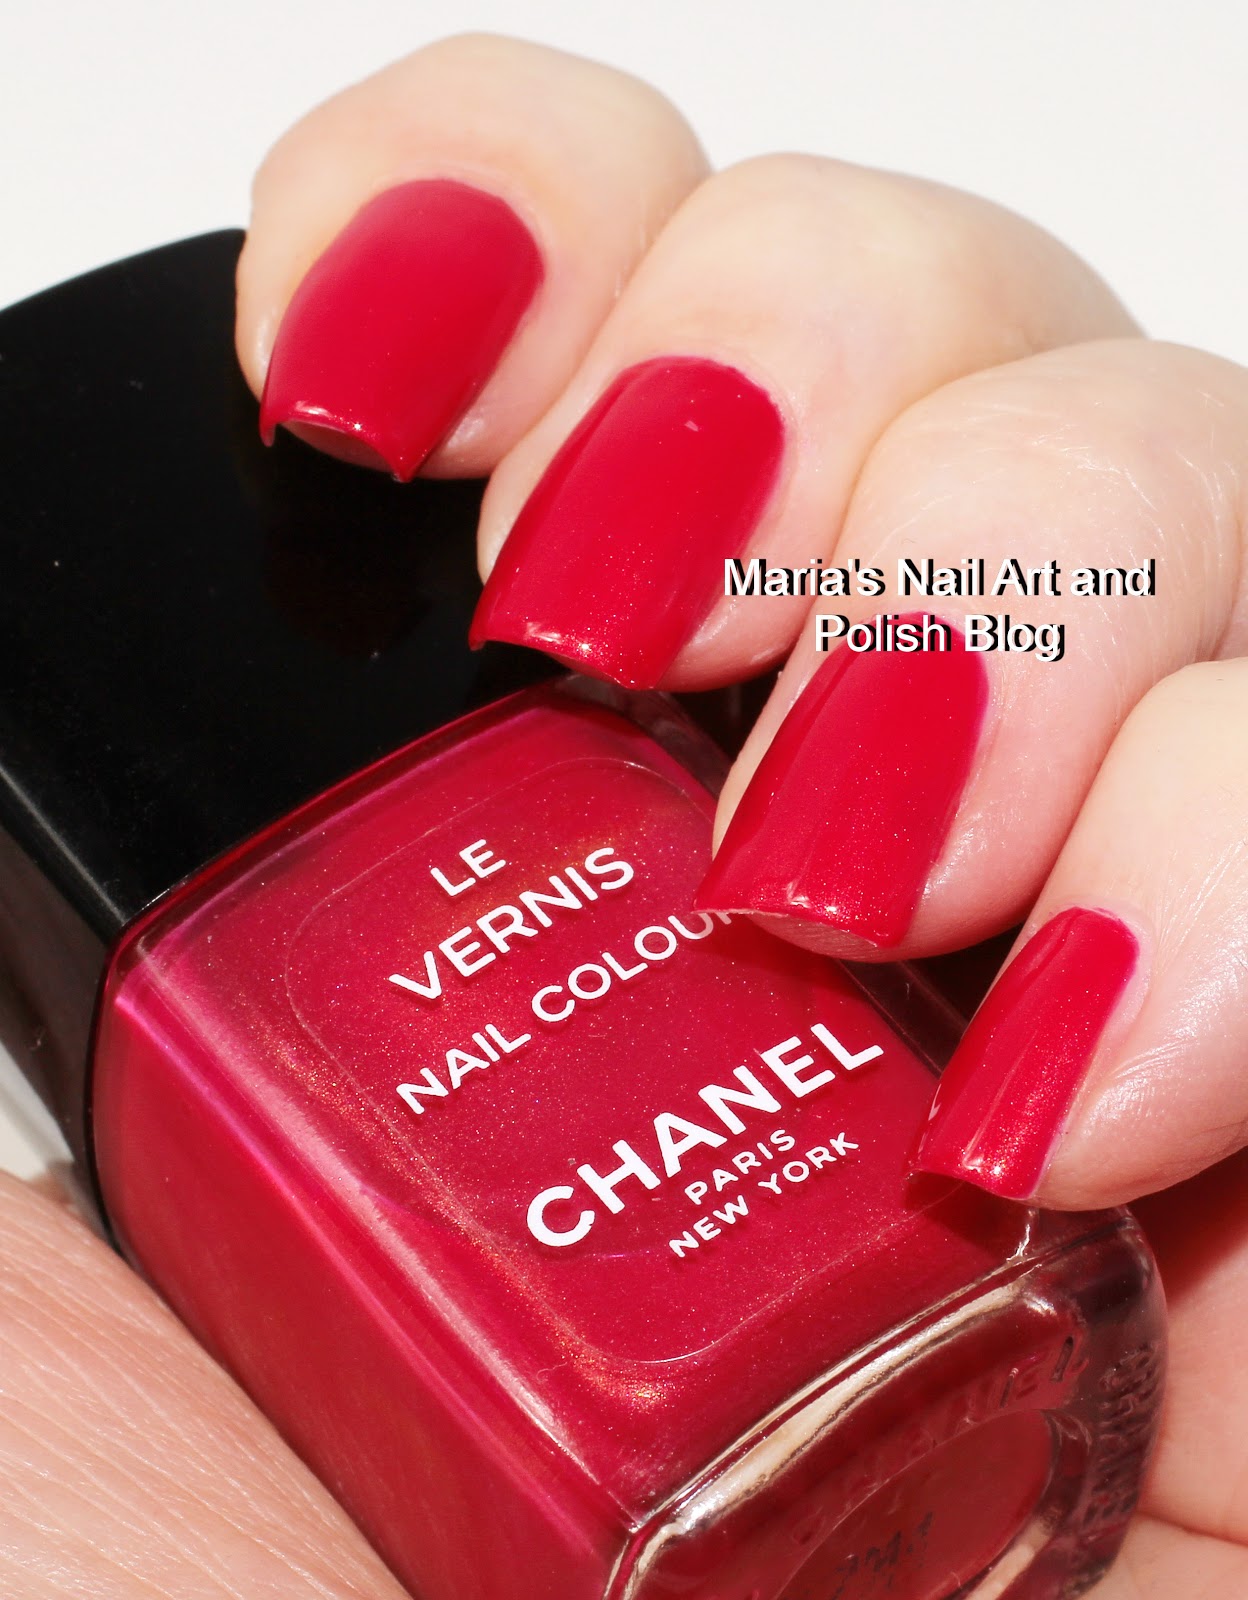 Marias Nail Art and Polish Blog: Chanel Rose D'Or - Golden Raspberry 46  swatches